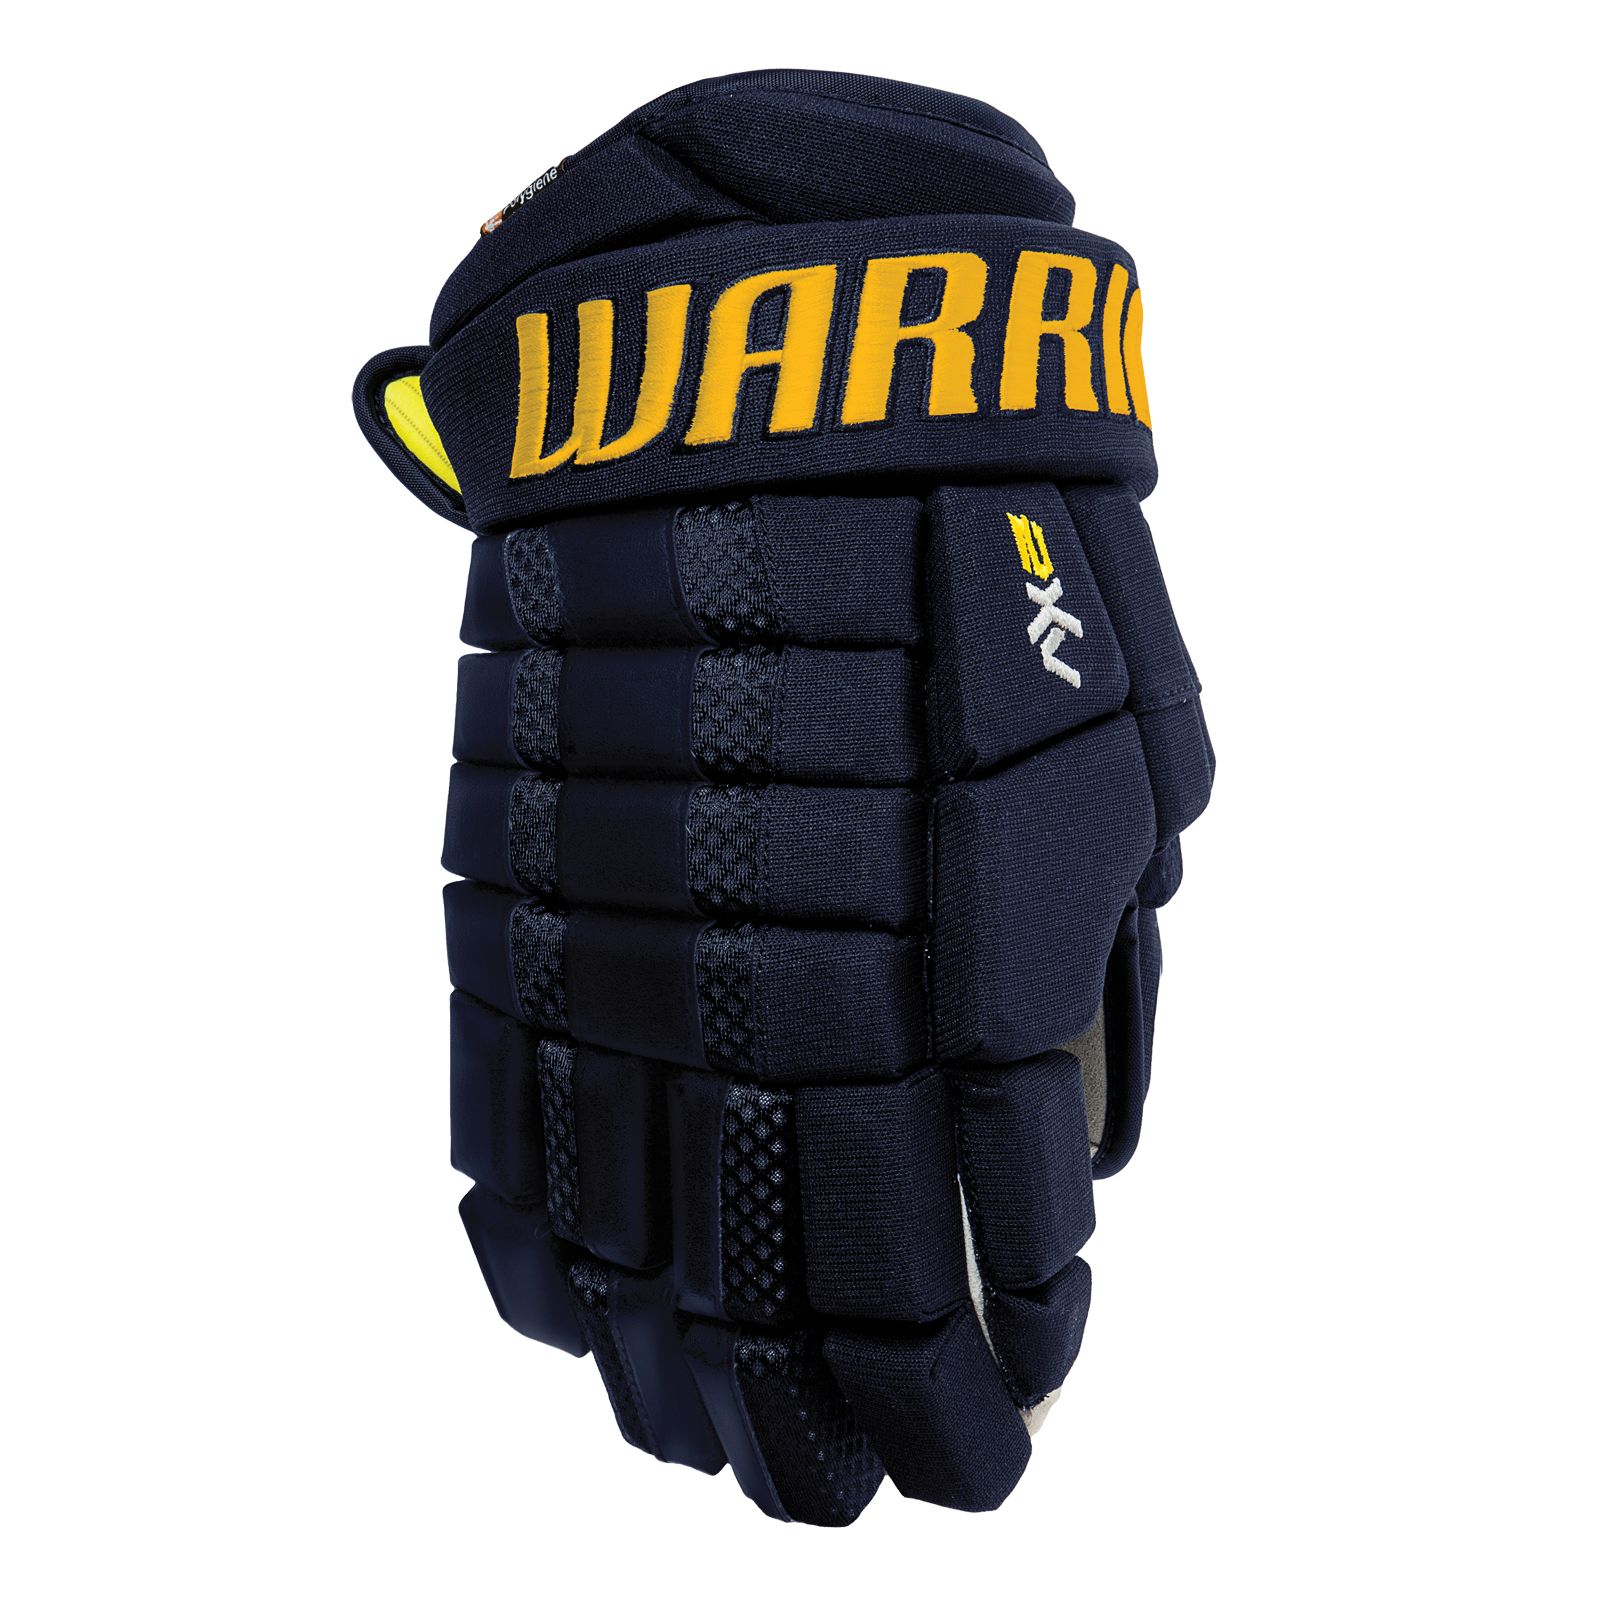 Dynasty AX2 Sr. Glove, Navy with Gold image number 0